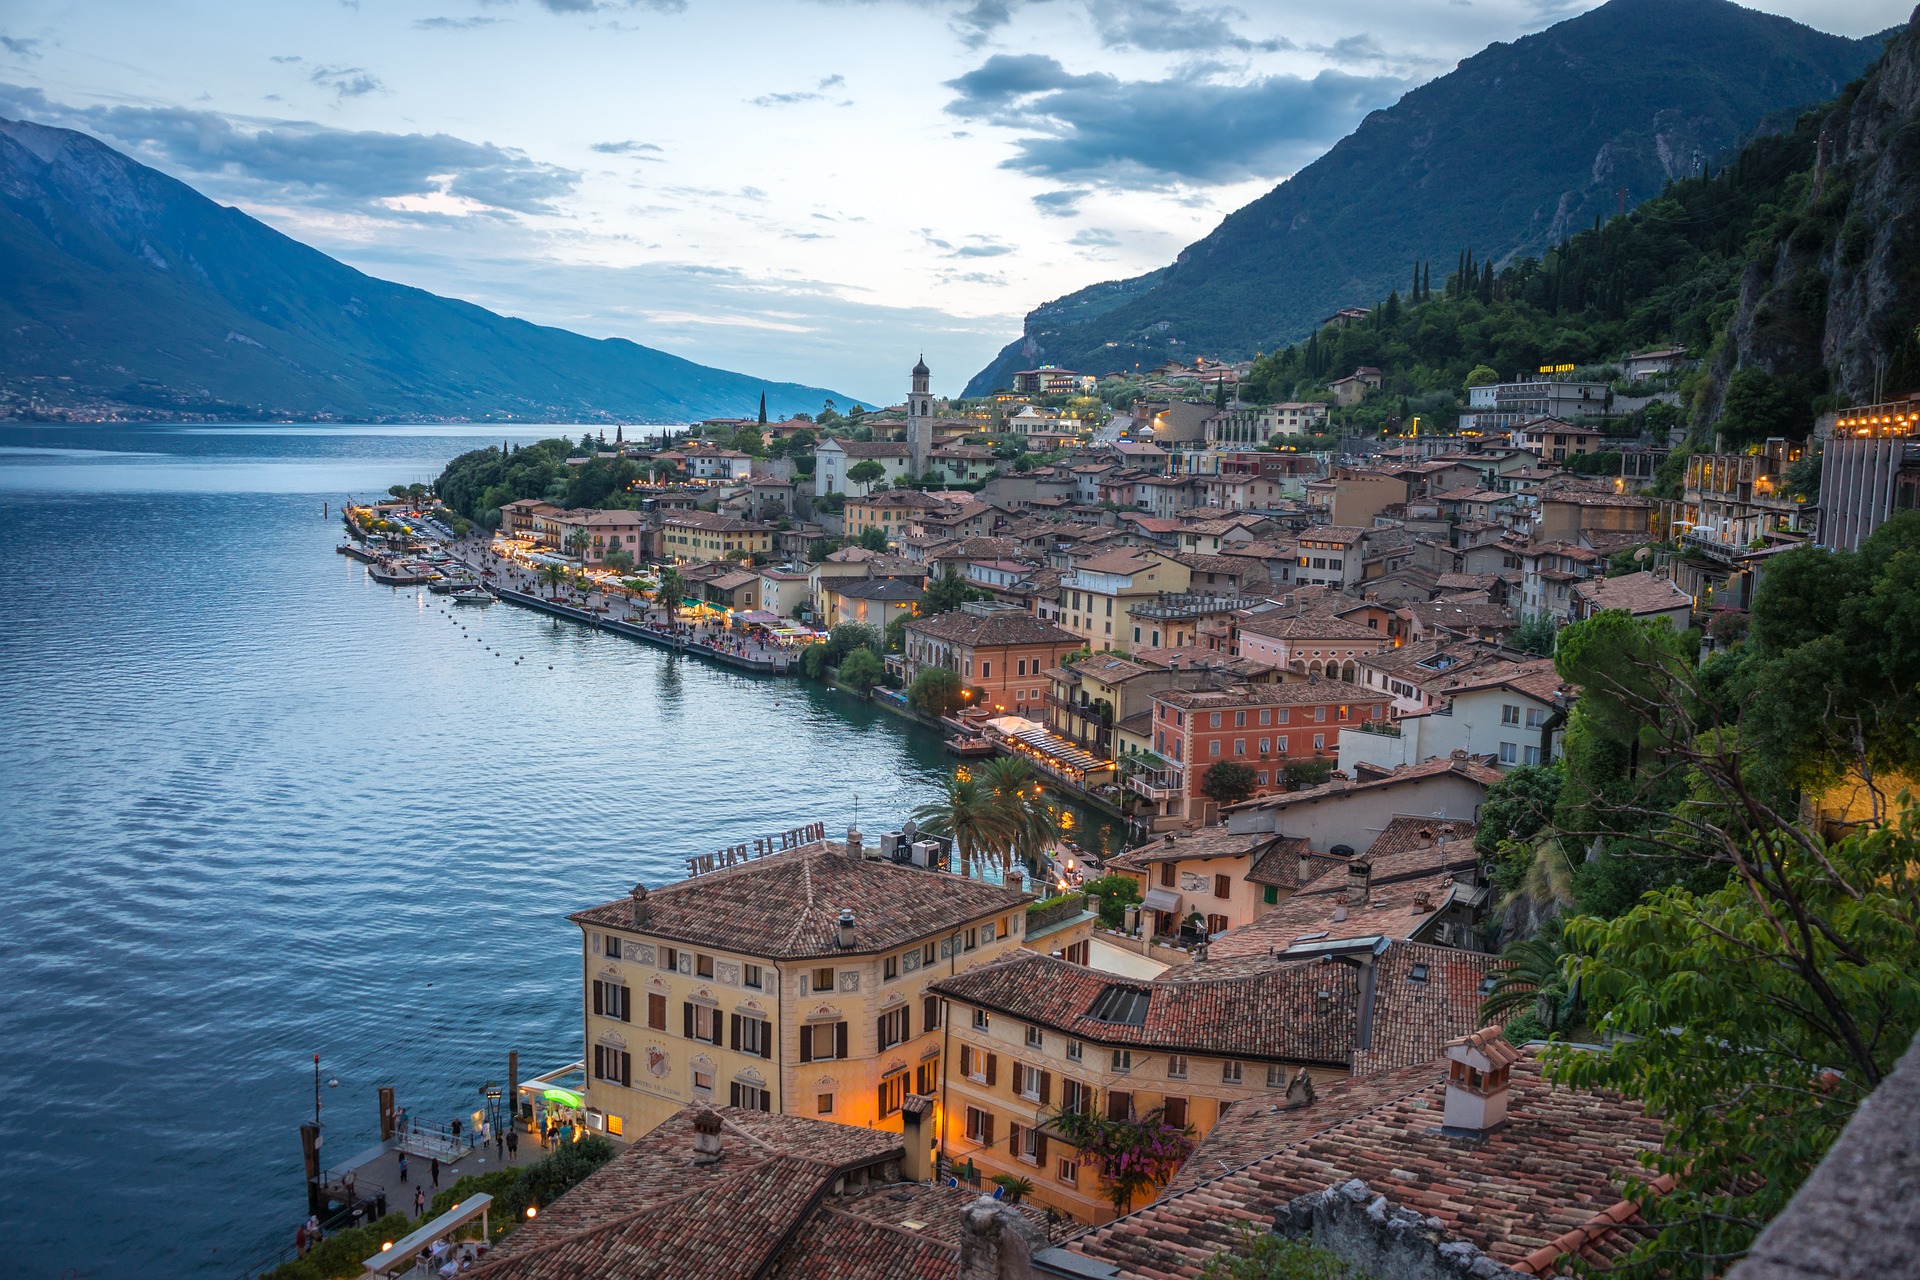 The Italian village with the “elixir” of healthy life